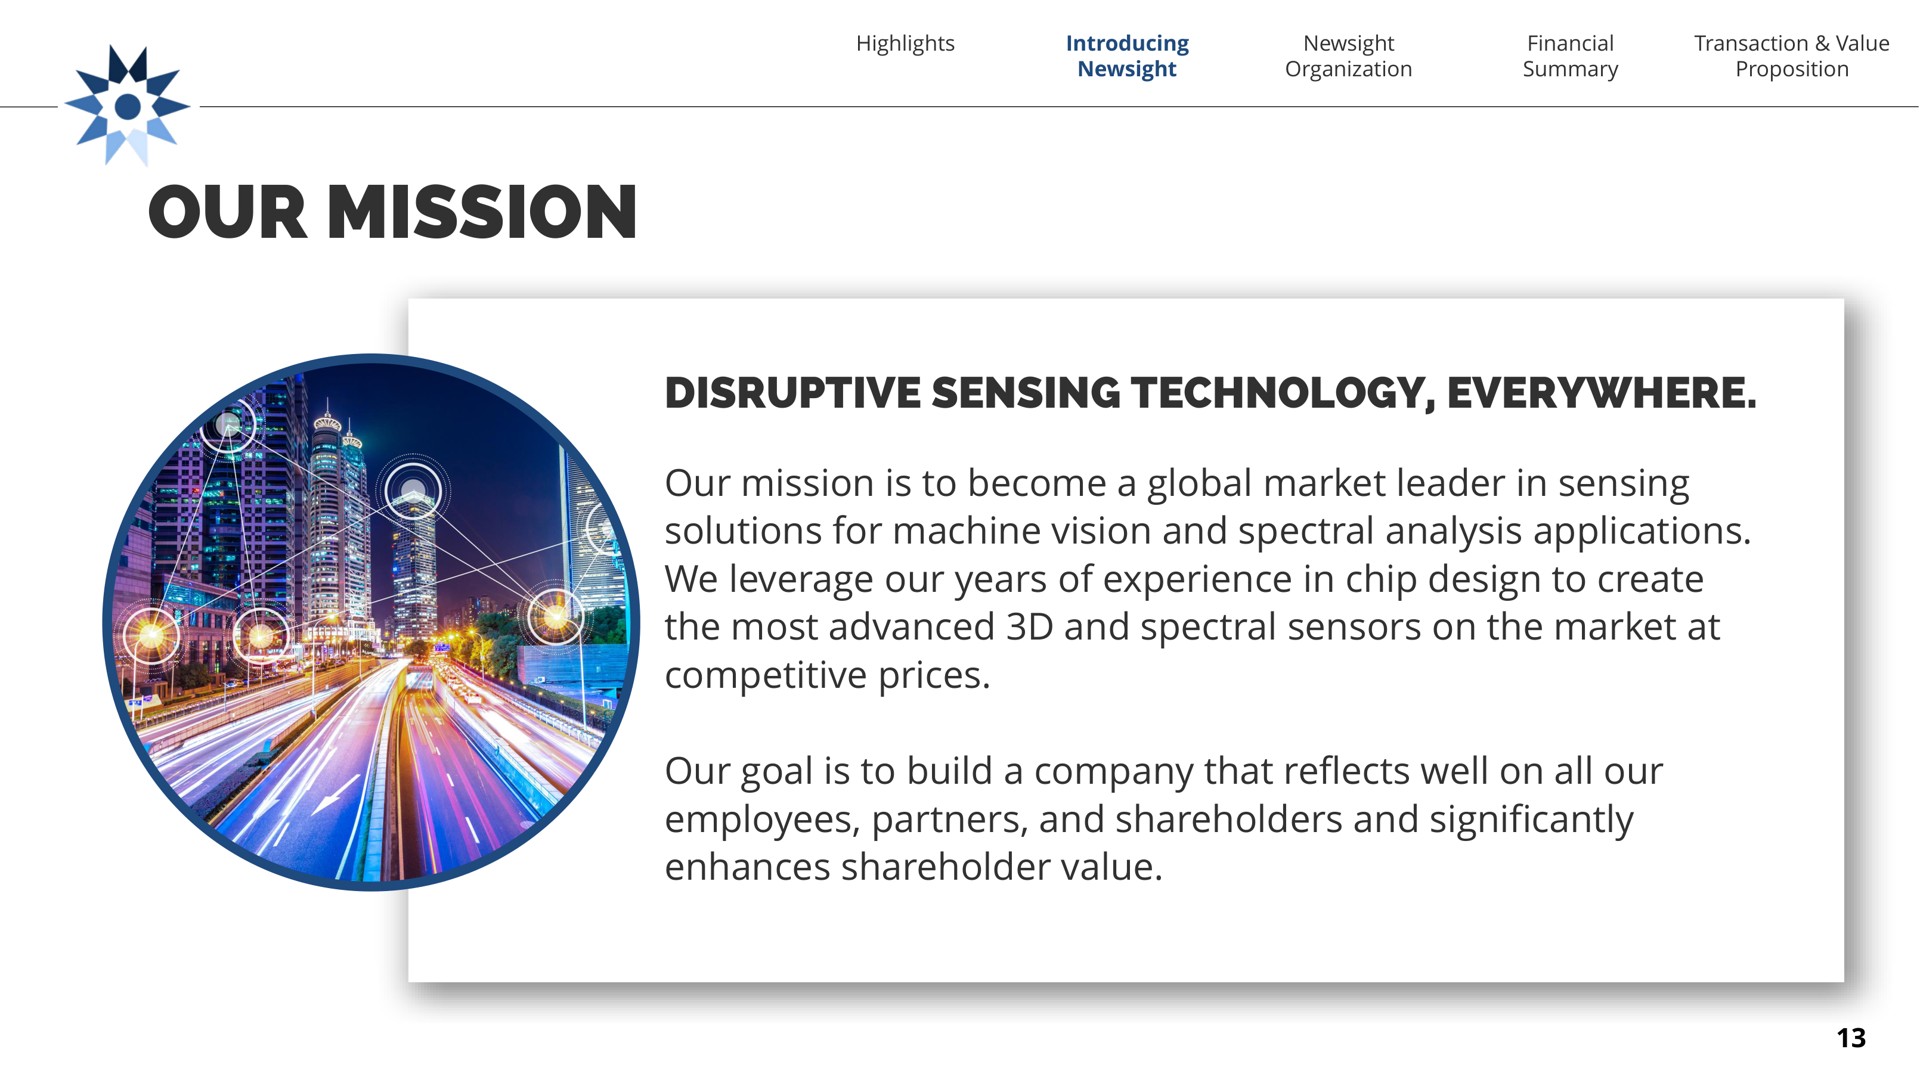 our mission disruptive sensing technology everywhere our mission is to become a global market leader in sensing solutions for machine vision and spectral analysis applications we leverage our years of experience in chip design to create the most advanced and spectral sensors on the market at competitive prices our goal is to build a company that reflects well on all our employees partners and shareholders and significantly enhances shareholder value | Newsight Imaging